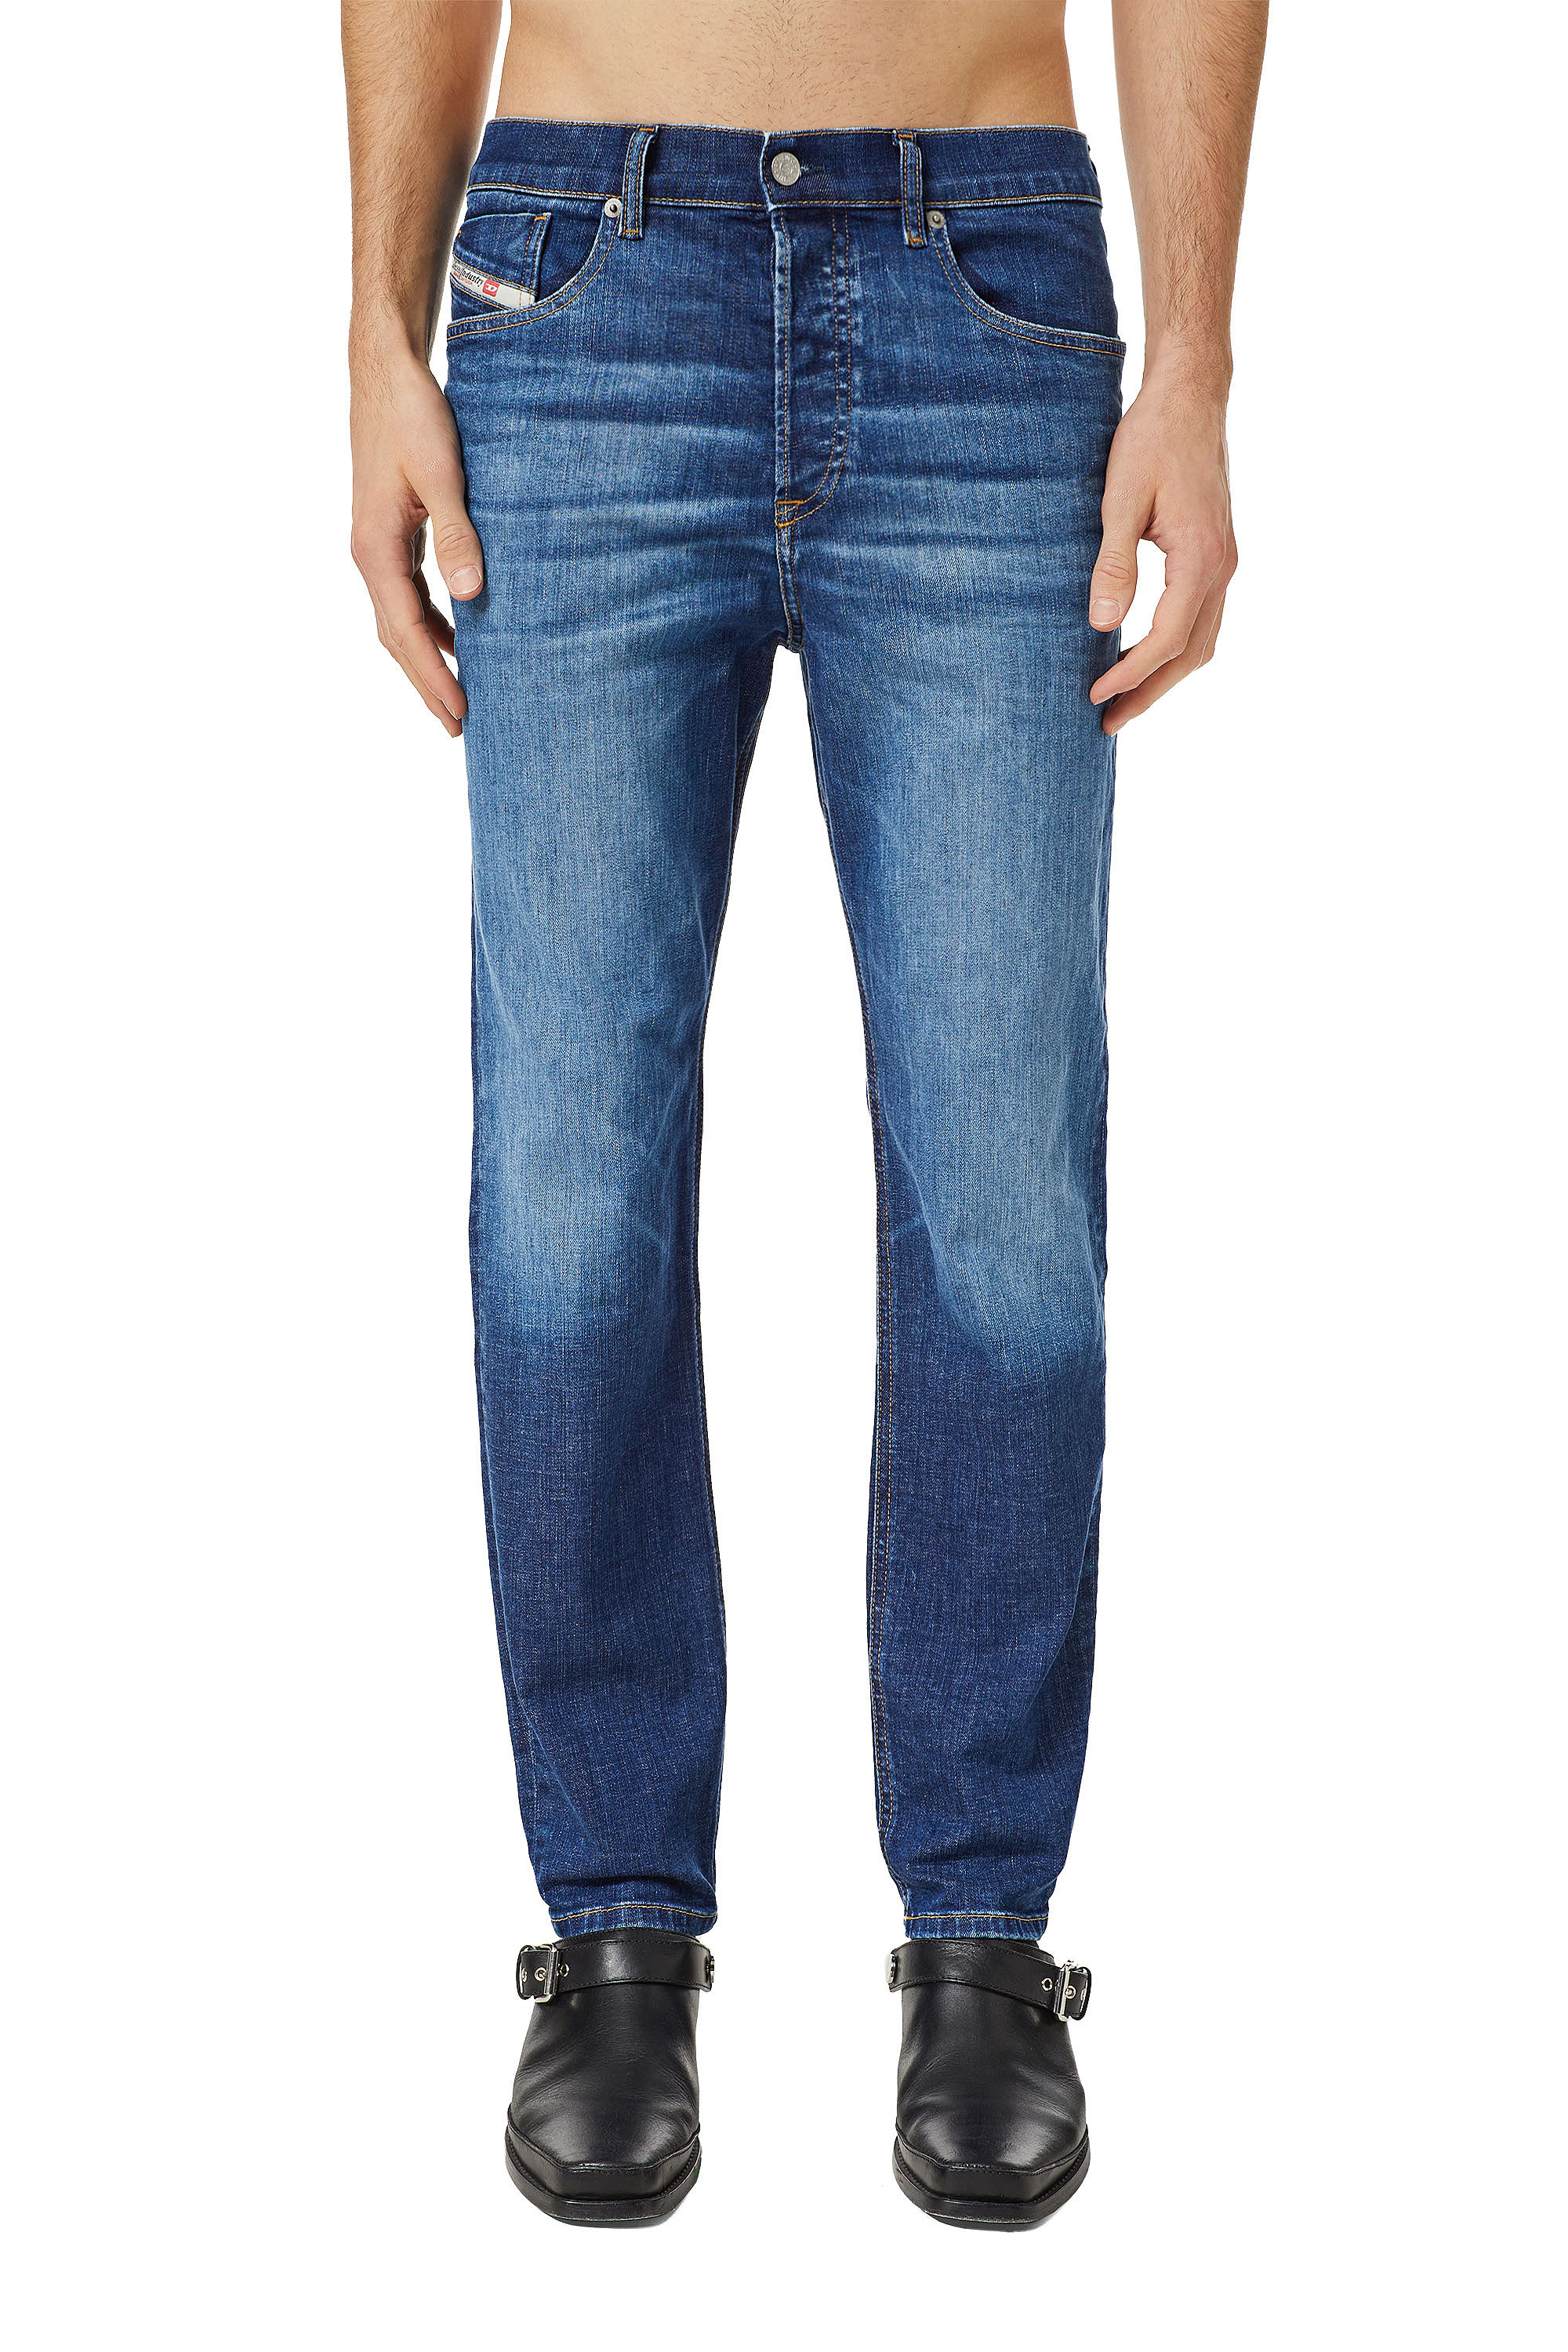 2005 D-FINING 09C72 Tapered Jeans, Mittelblau - Jeans